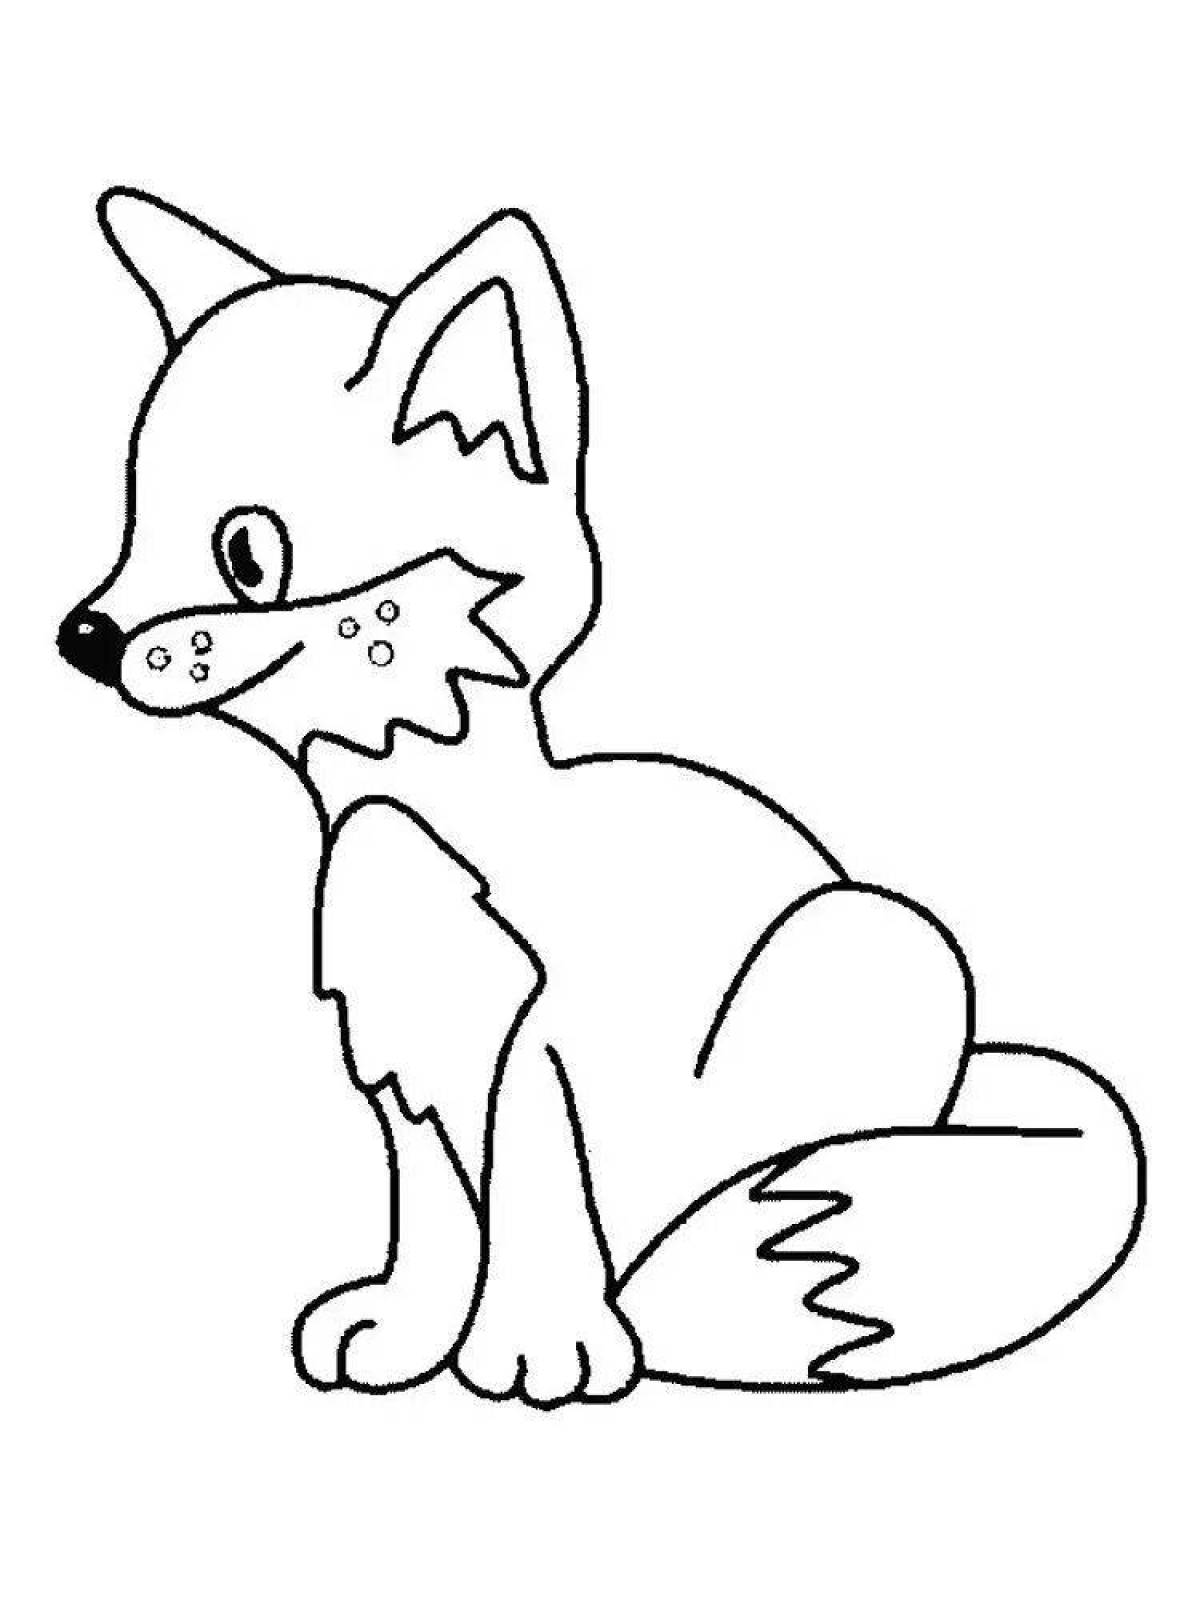 Curious fox coloring